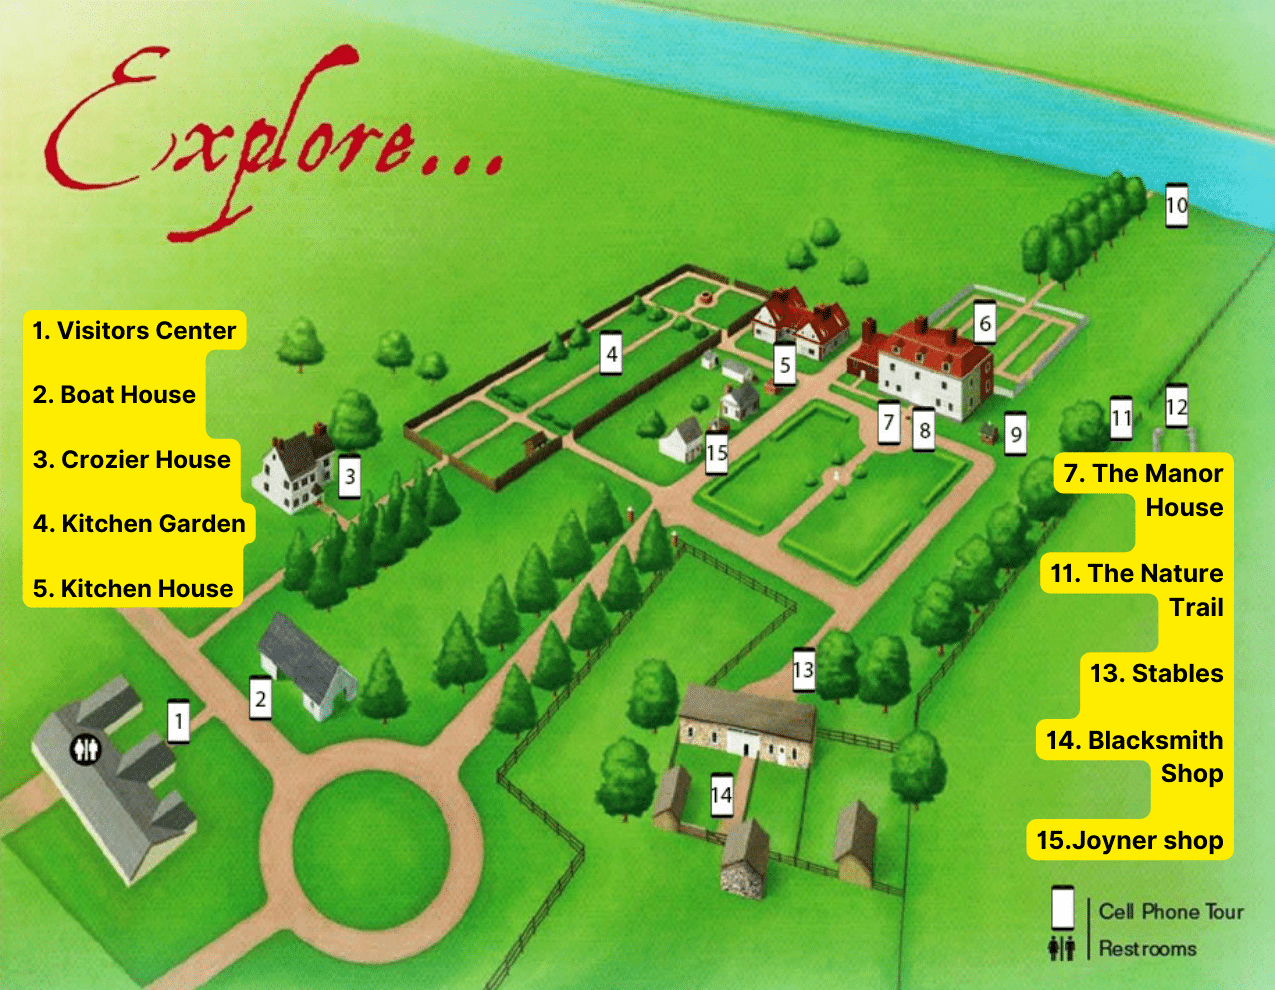 Map of Pennsbury Manor grounds